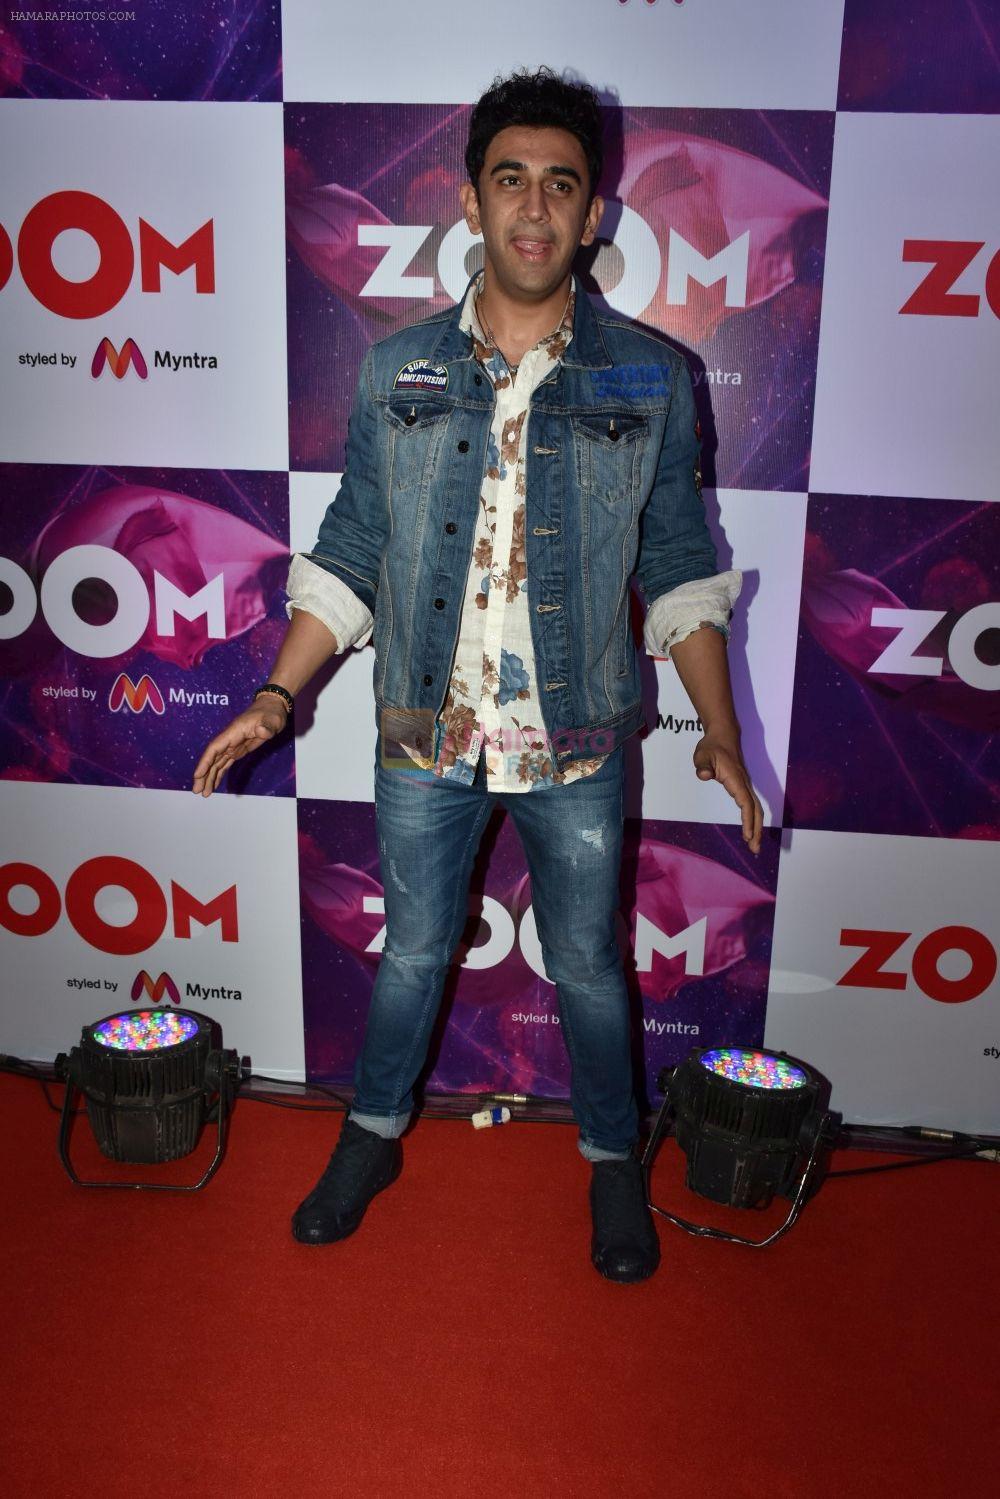 Amit Sadh at the Re-Launch Of Zoom Styles By Myntra Party on 19th April 2018